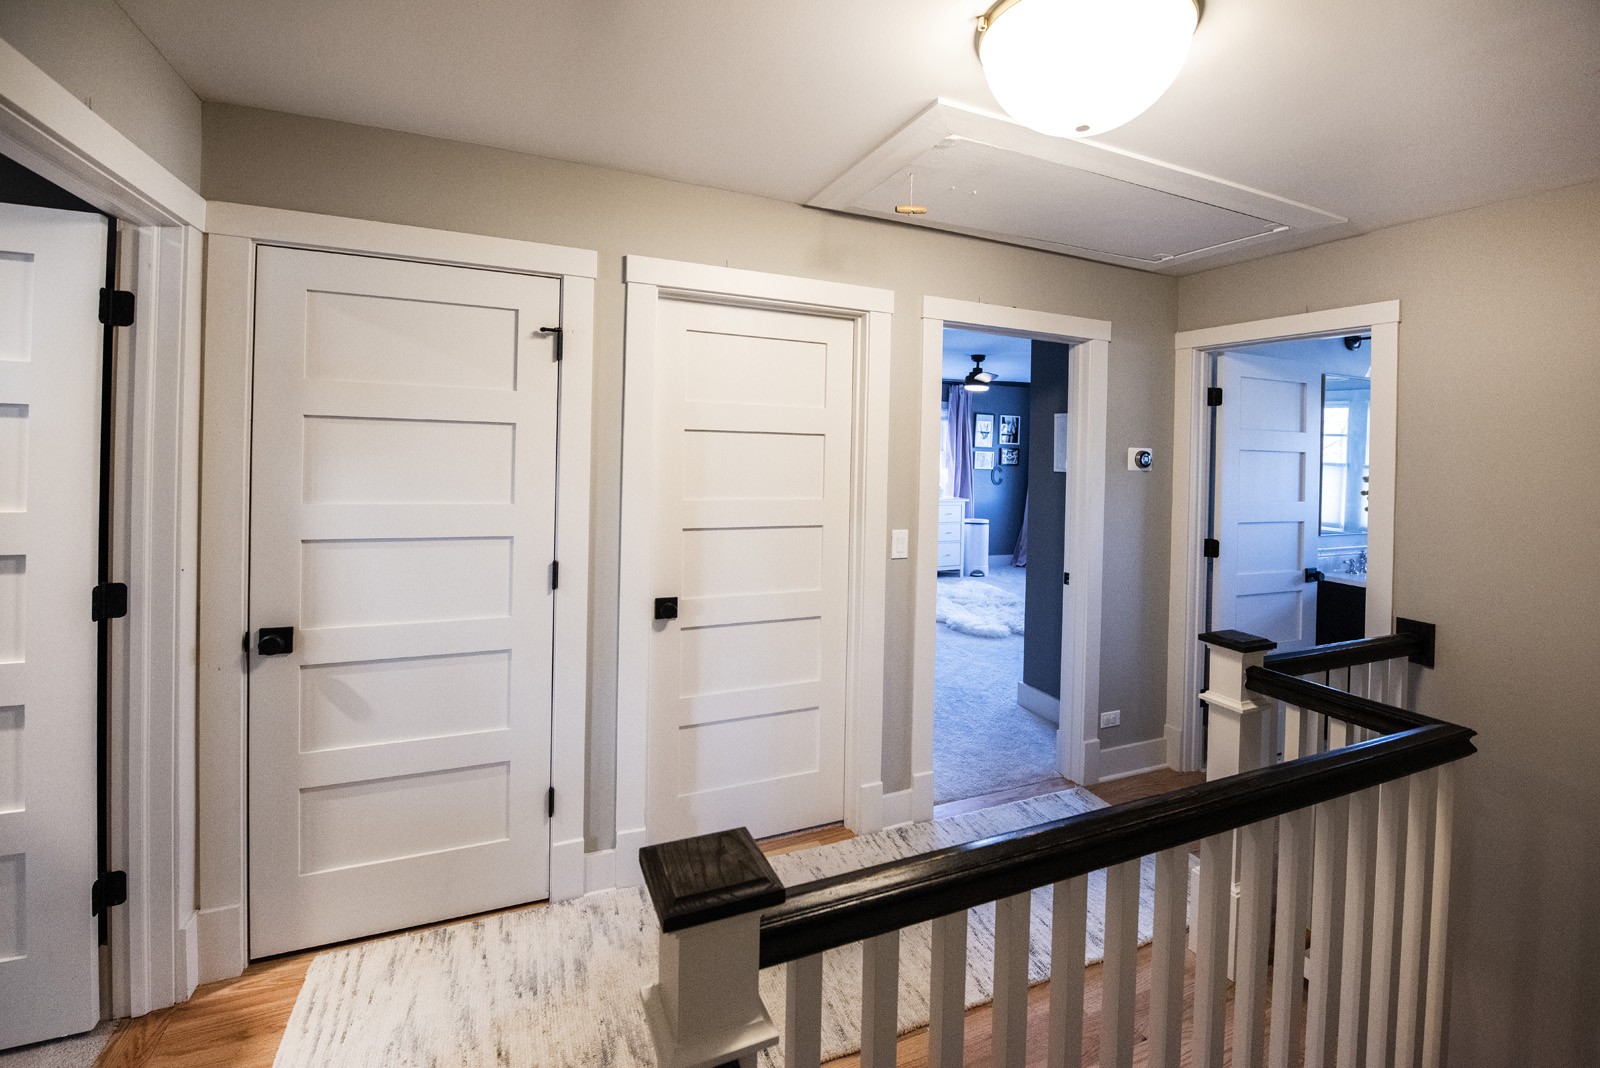 The hallway of the second level of a home with white doors to rooms and a rug on hardwood floors